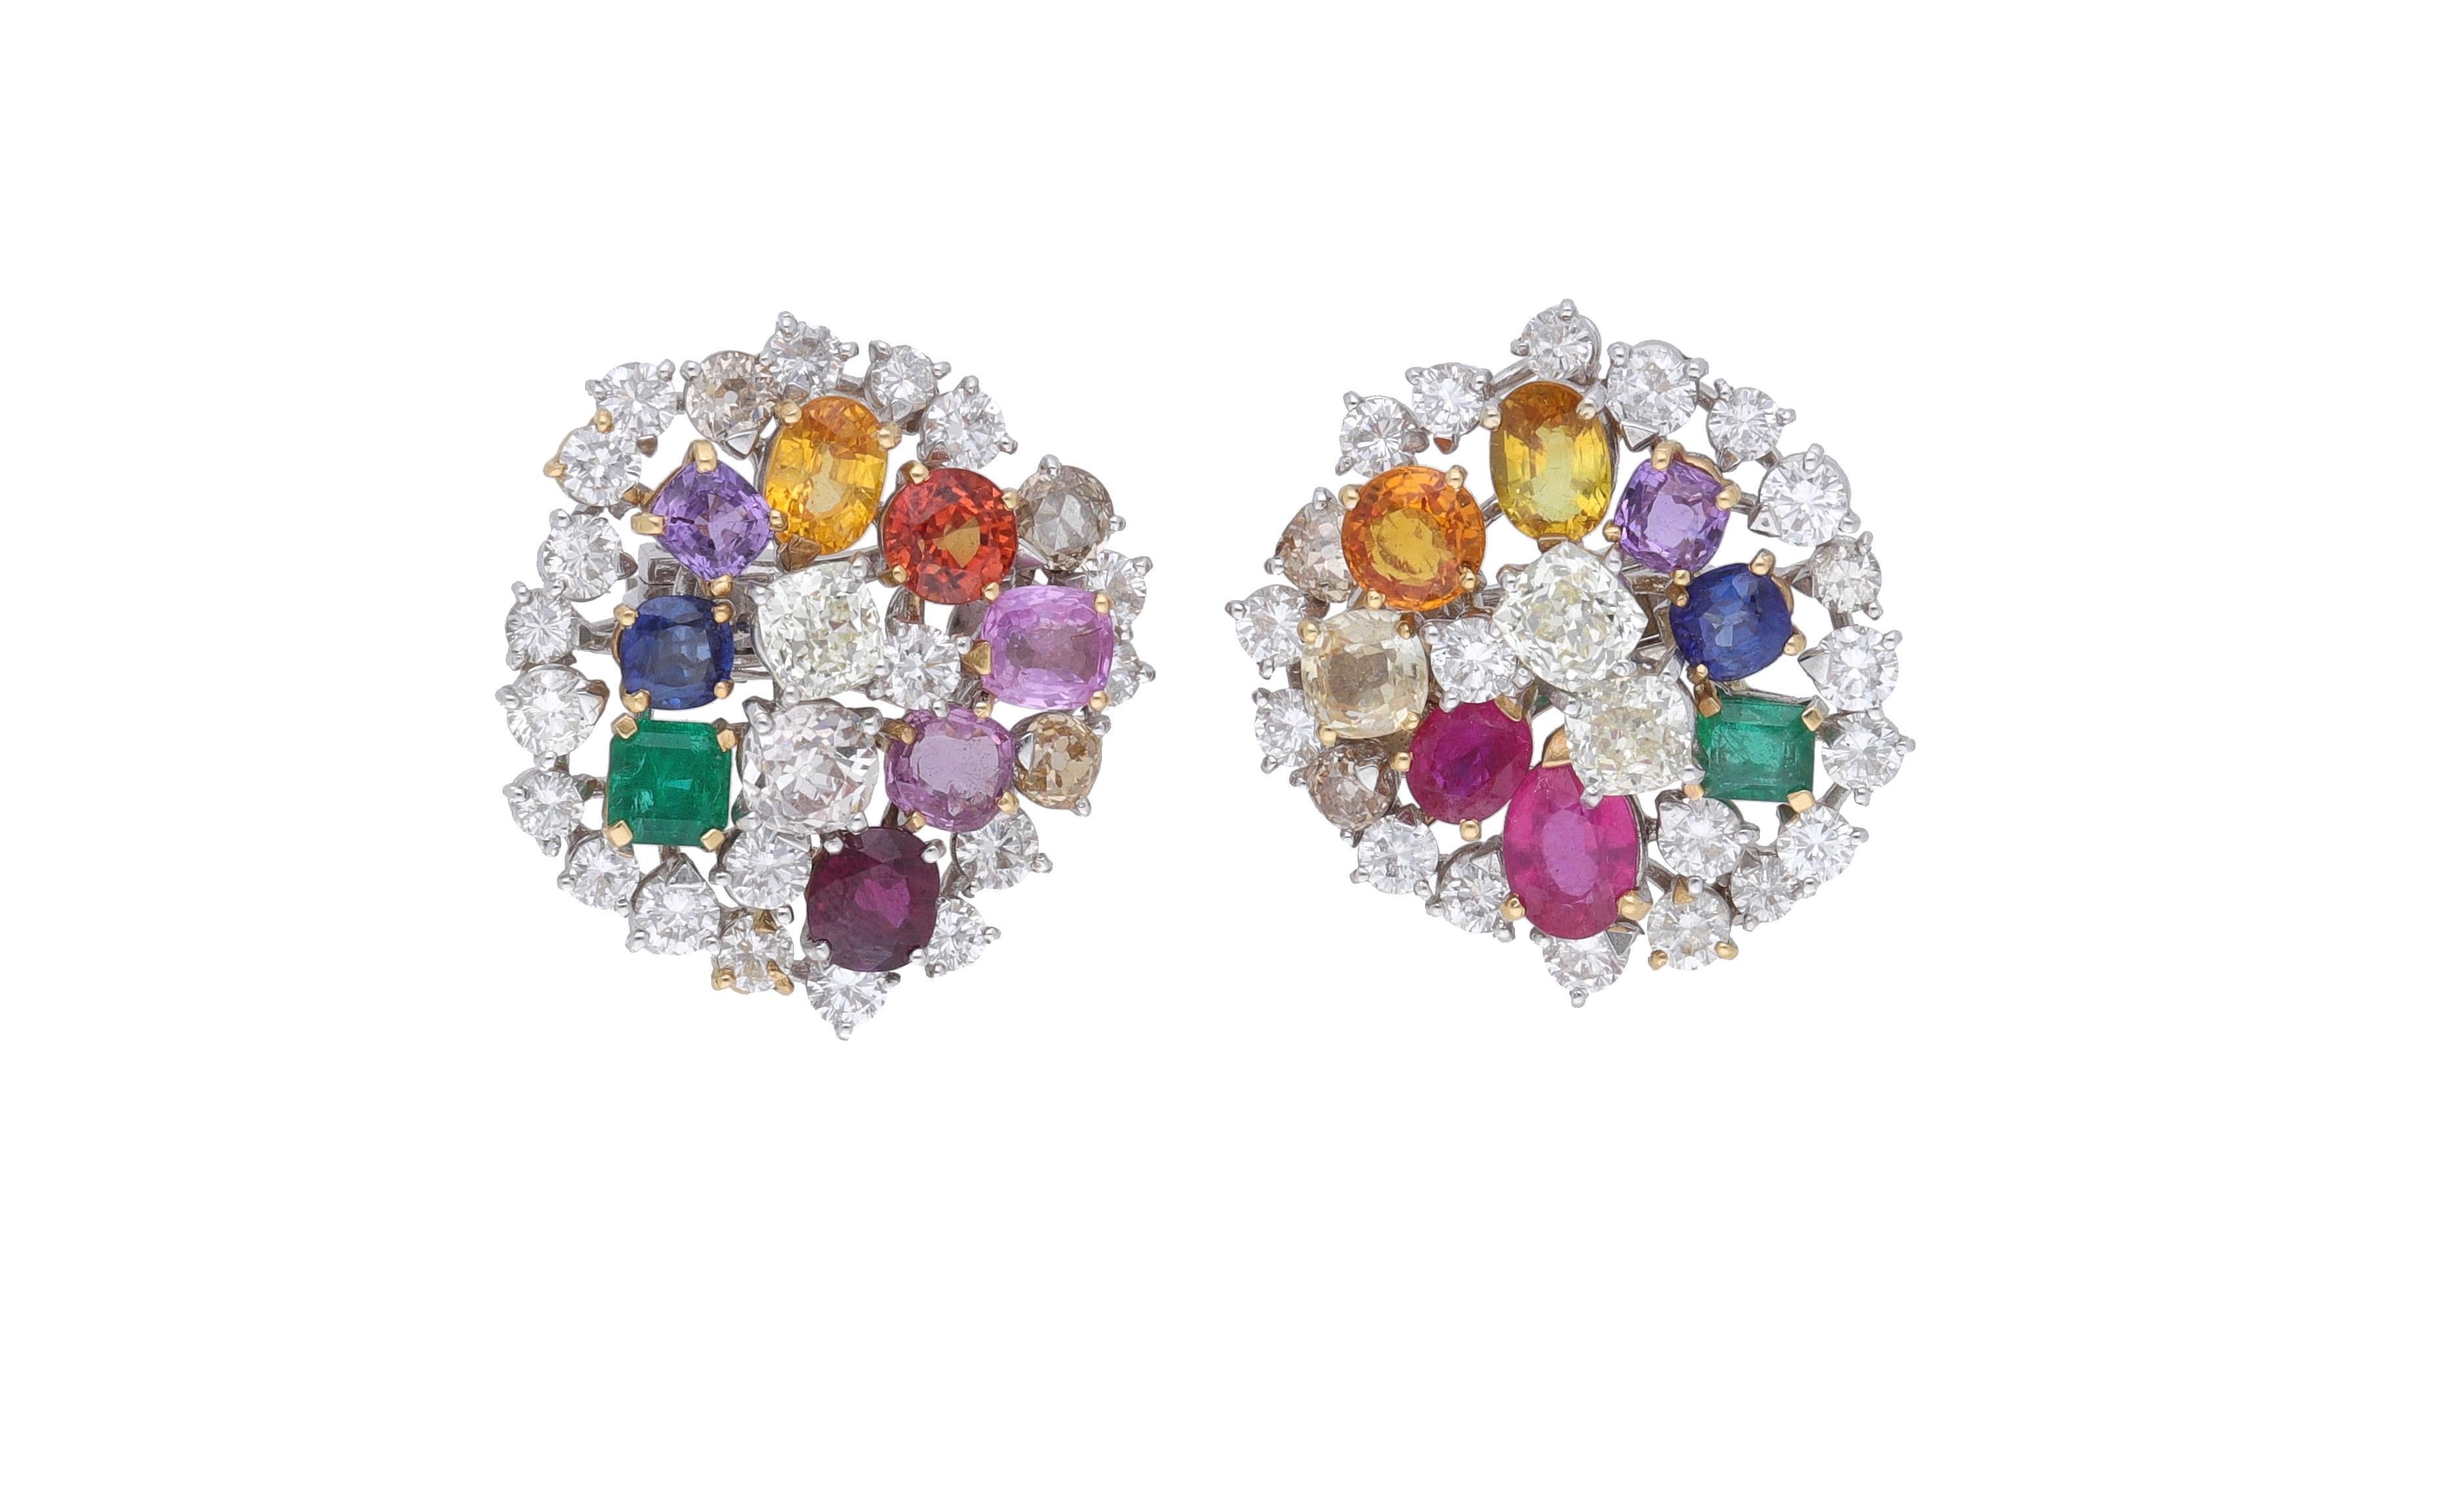 Fraleoni 18 Karat White Gold Diamonds Rubies Emeralds Sapphires Earrings In New Condition For Sale In Rome, IT